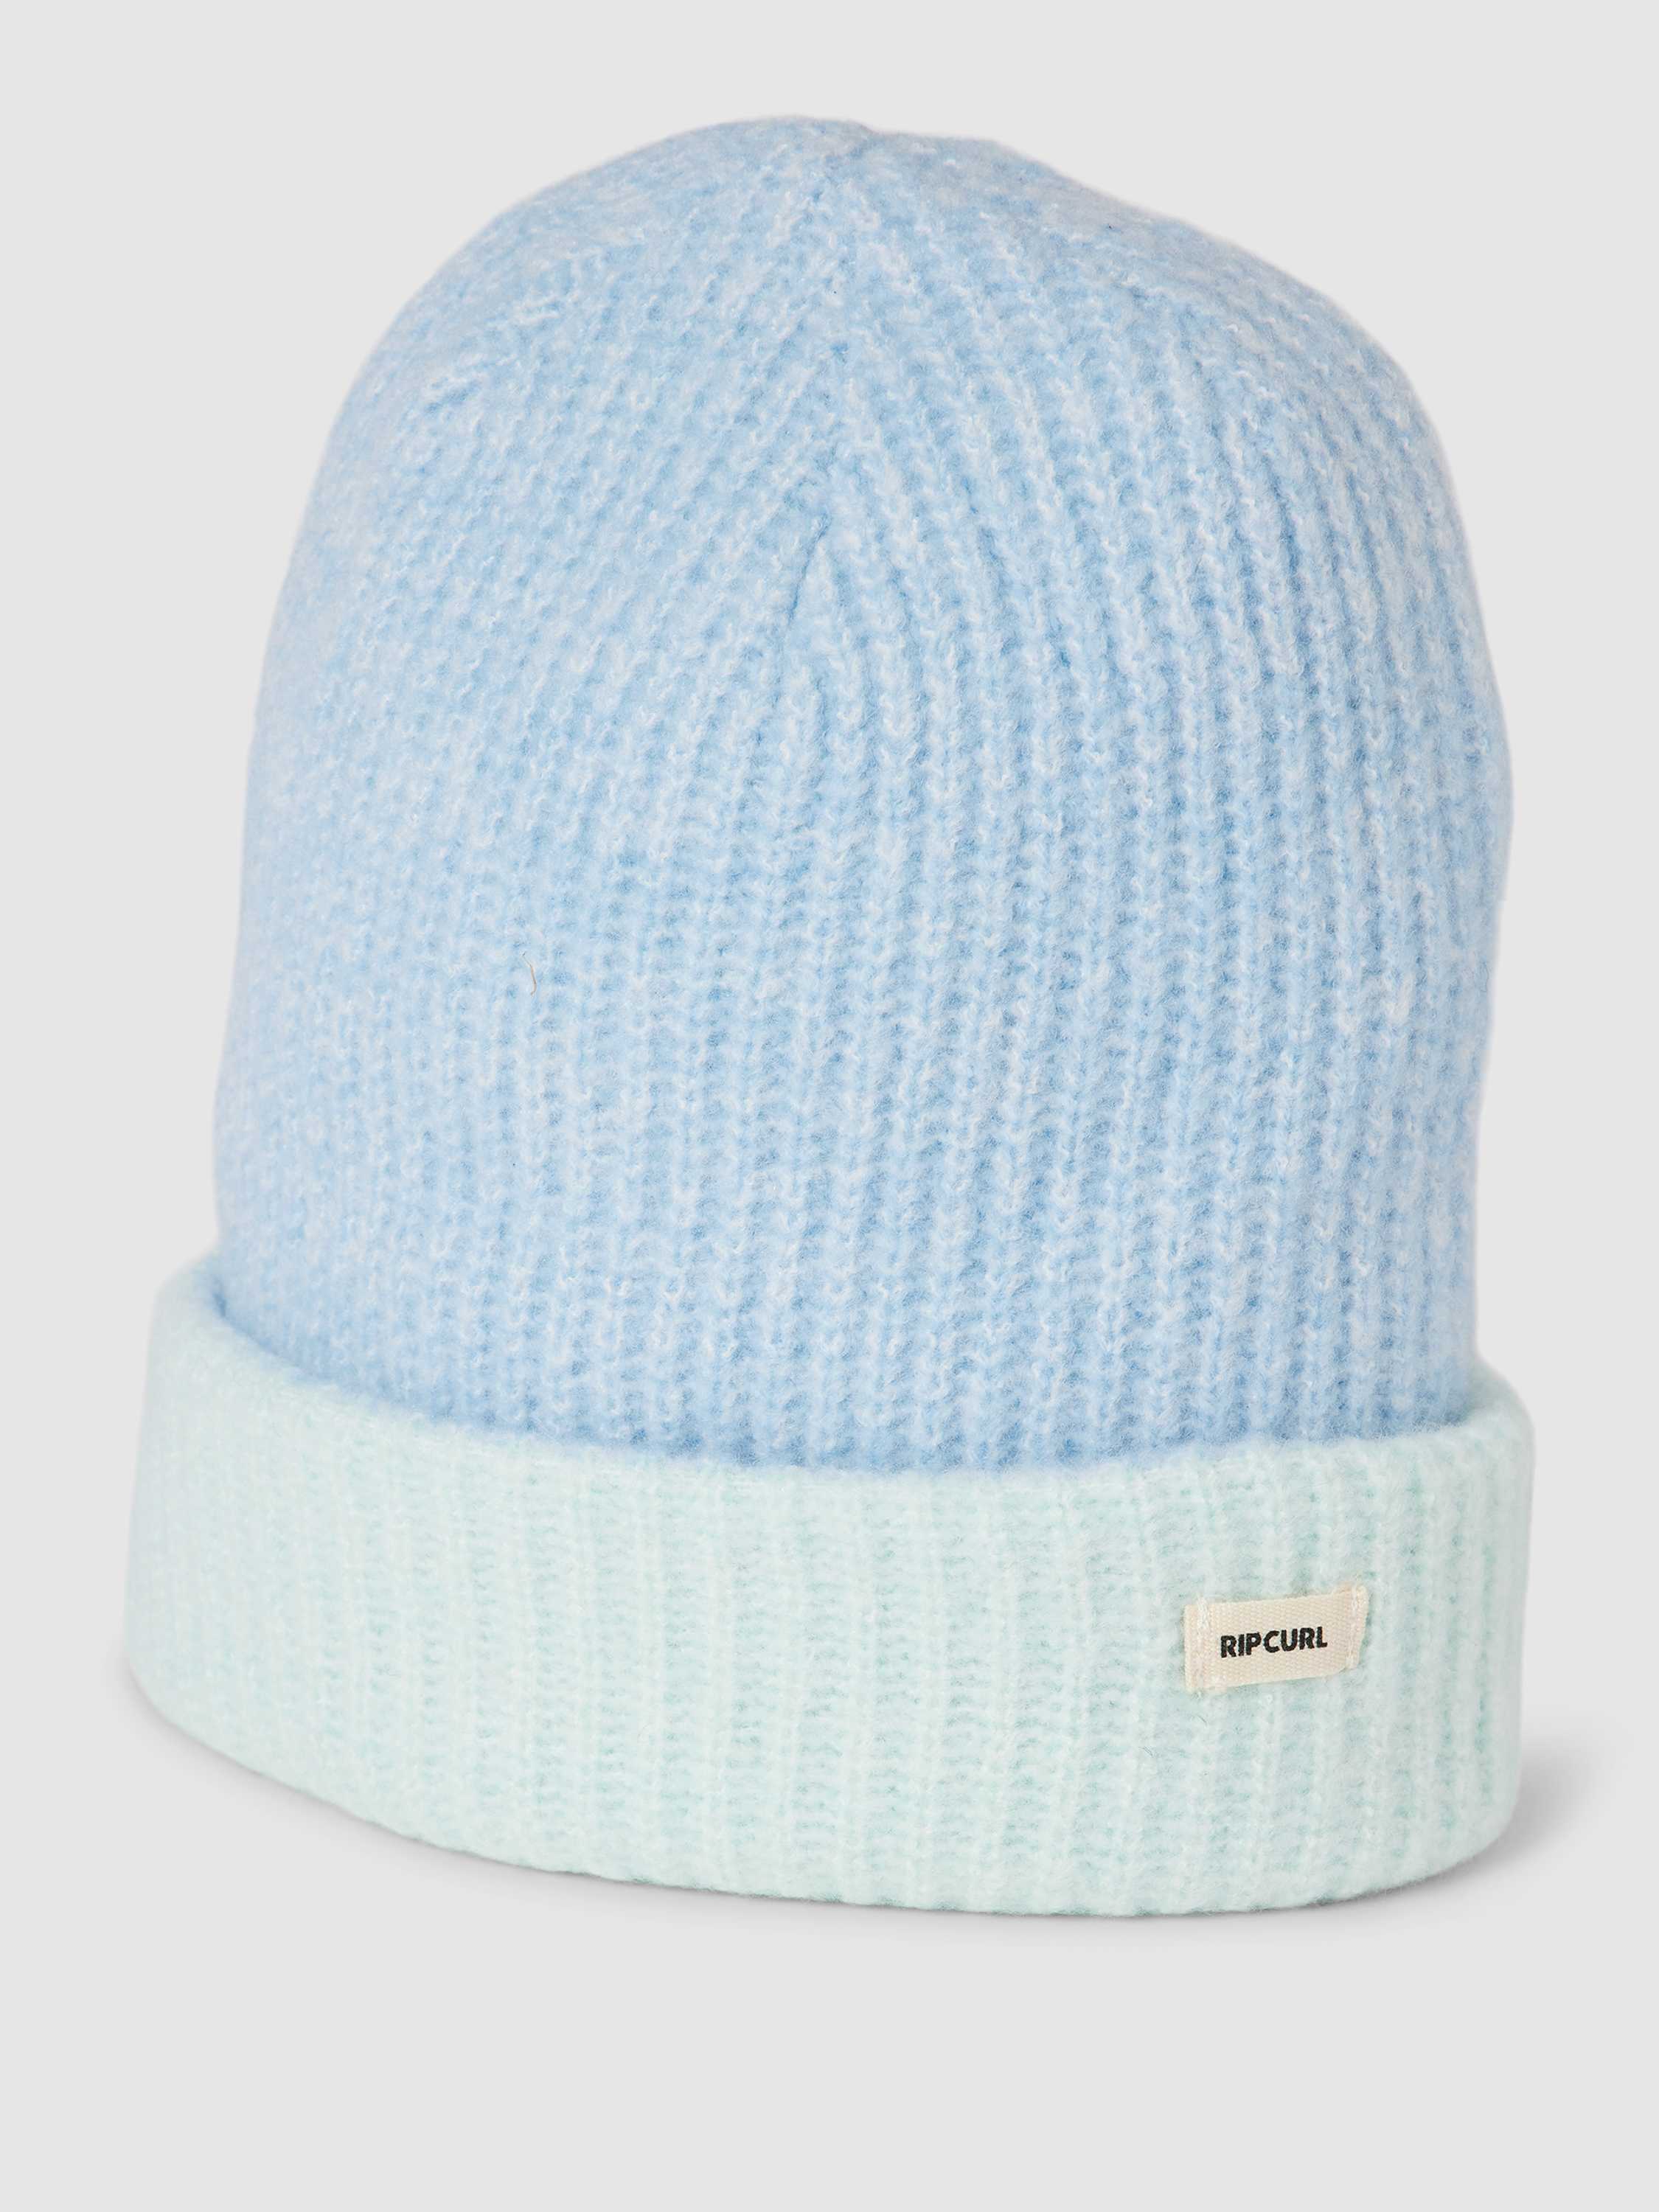 Rip Curl Beanie met labeldetail in two-tone-stijl